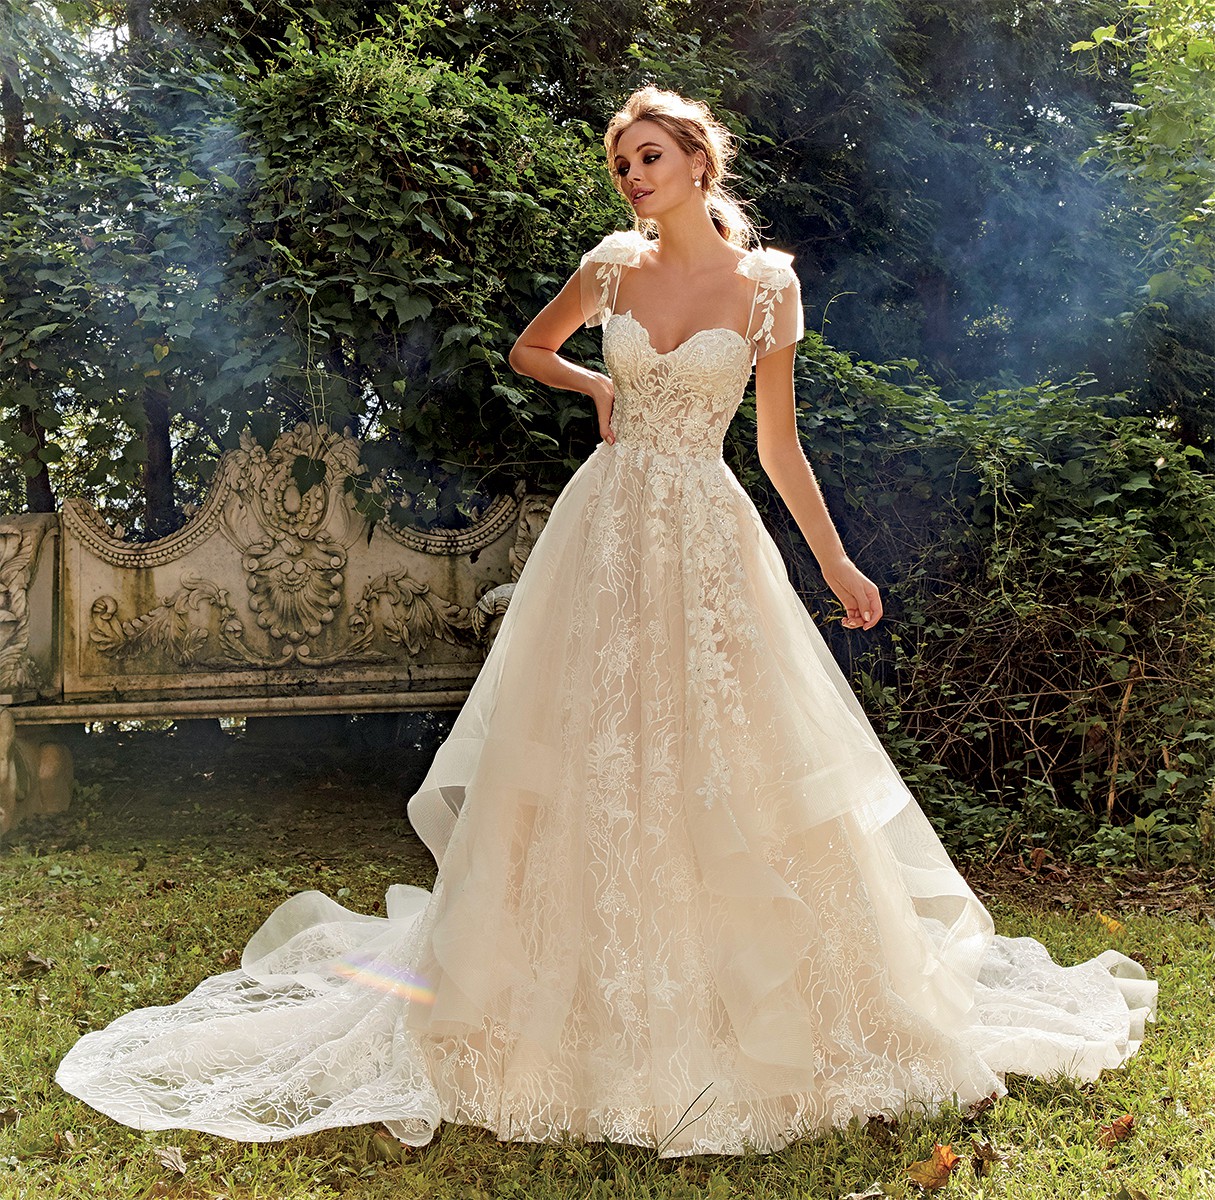 Strapless Ball Gown Wedding Dress With Beaded Lace And Sparkle Tulle   Kleinfeld Bridal